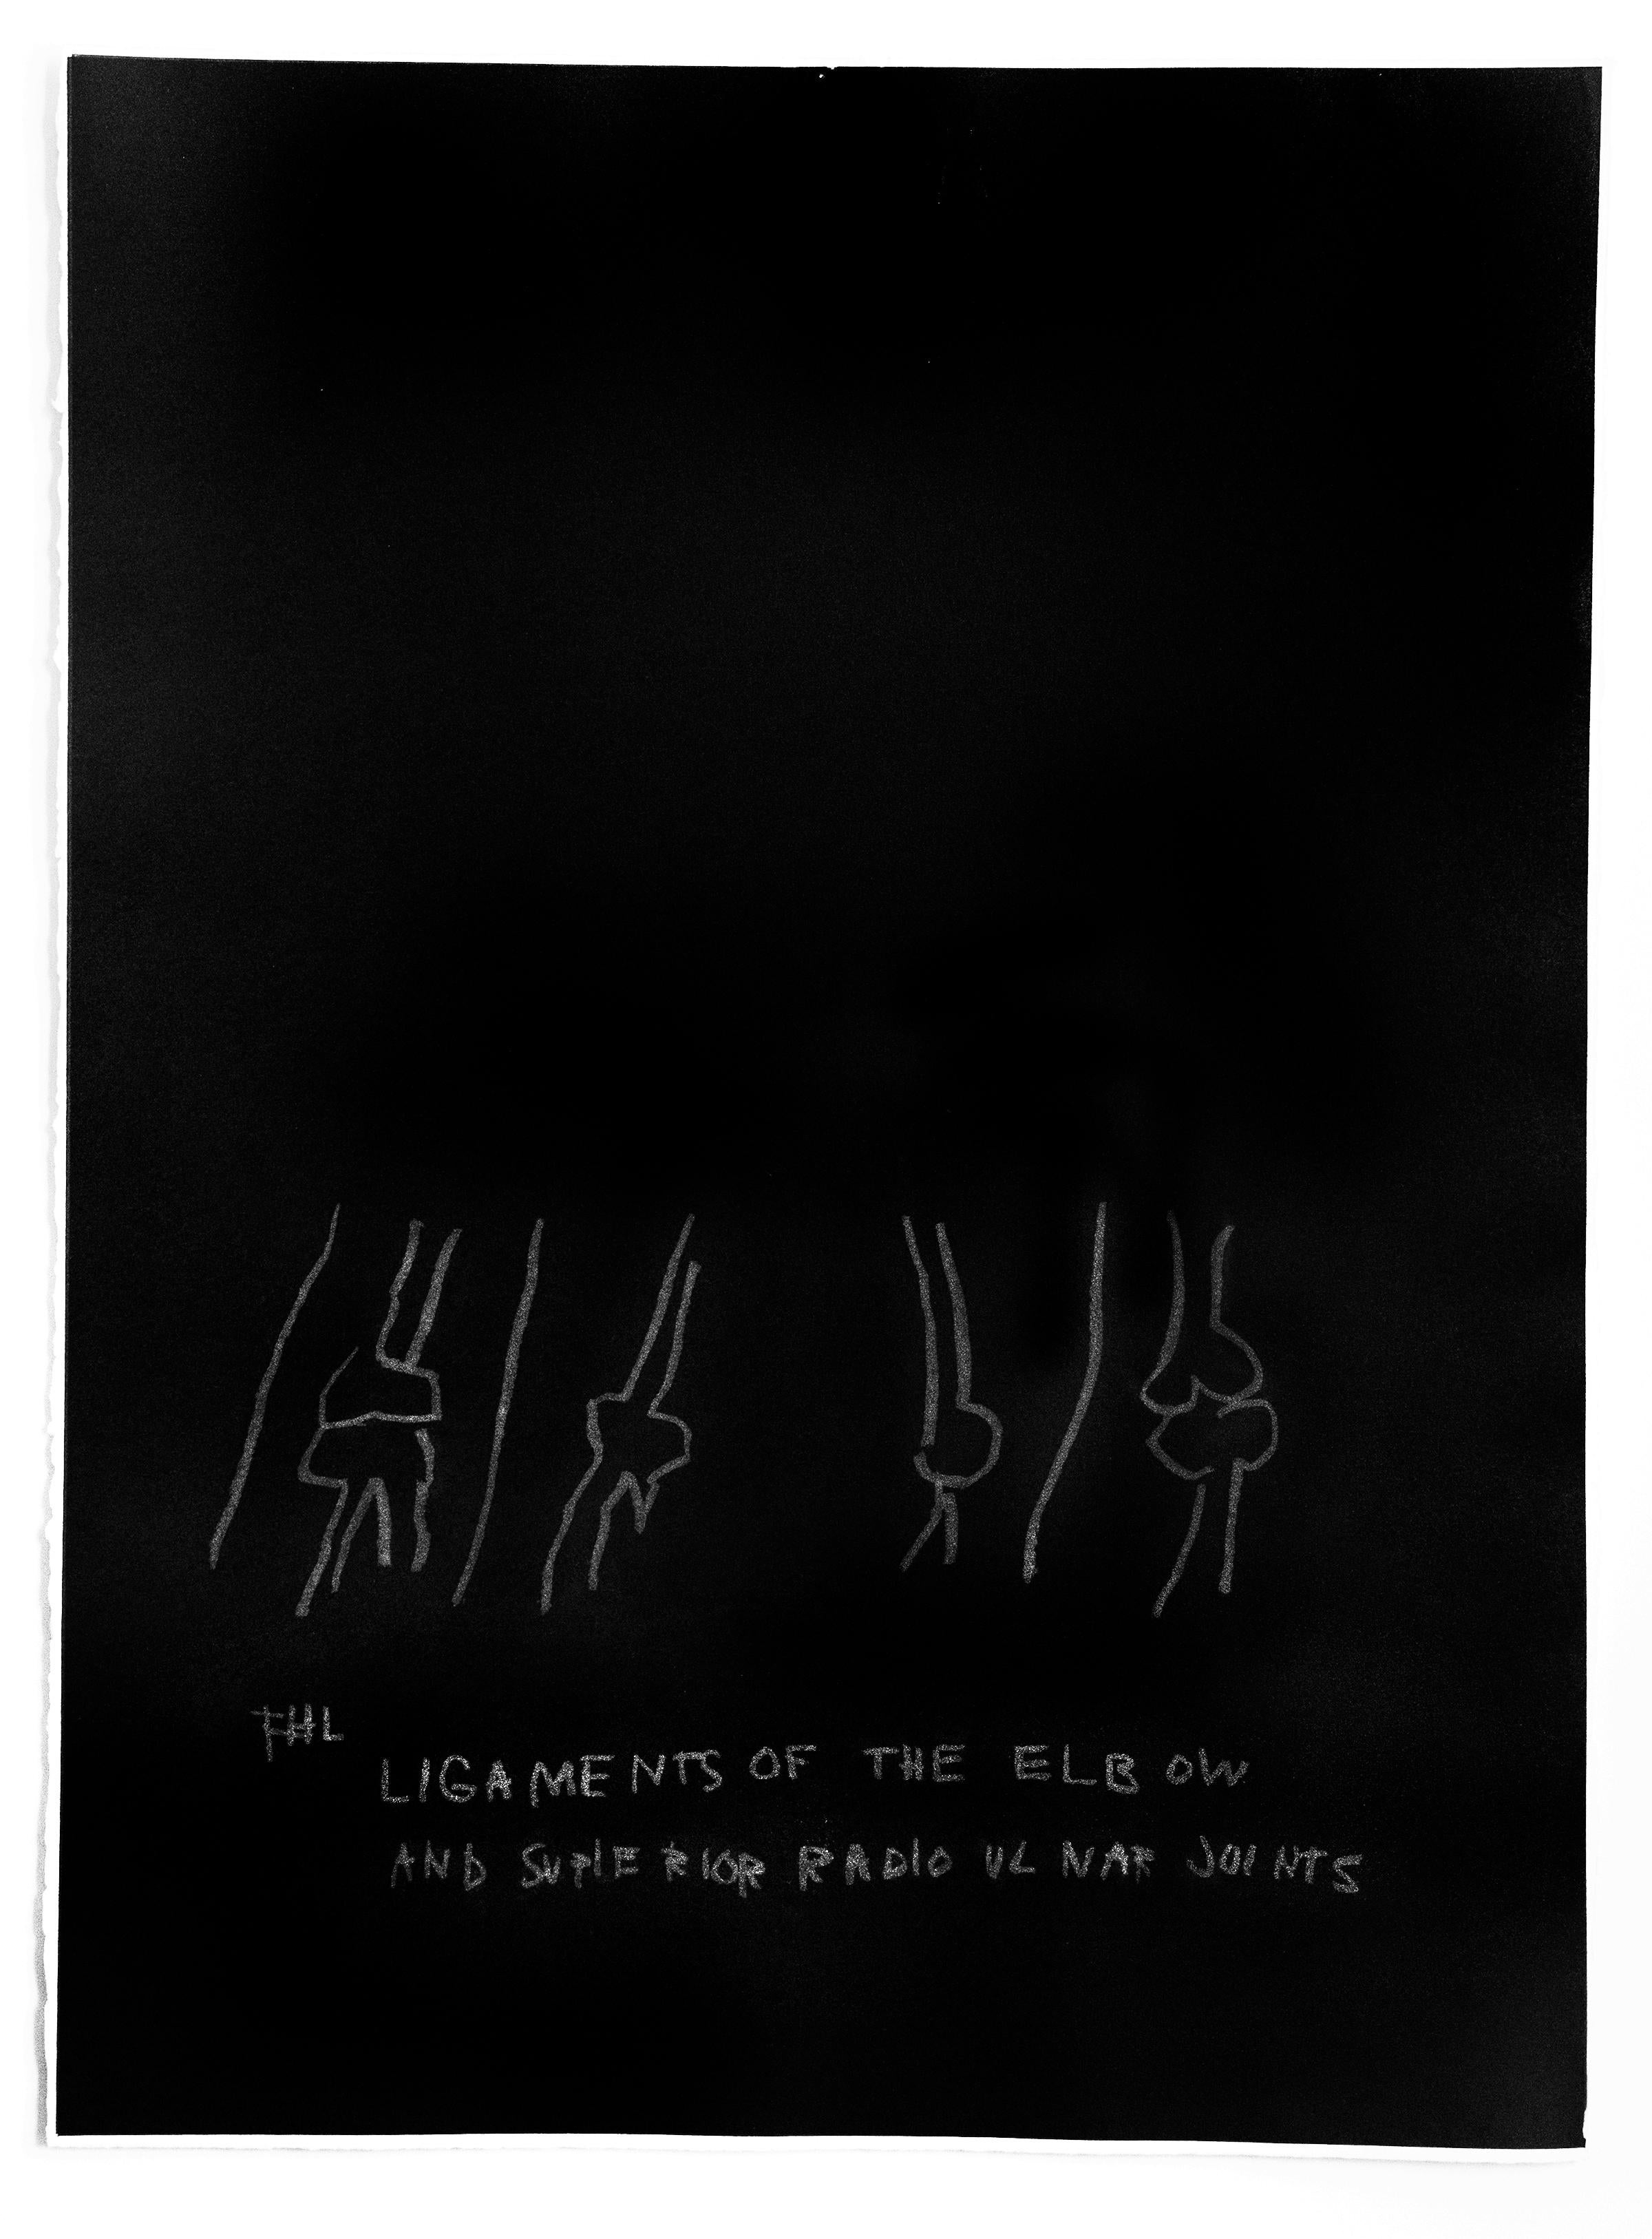 Jean-Michel Basquiat Print - "Ligaments of the Elbow" plate from the Anatomy Series"